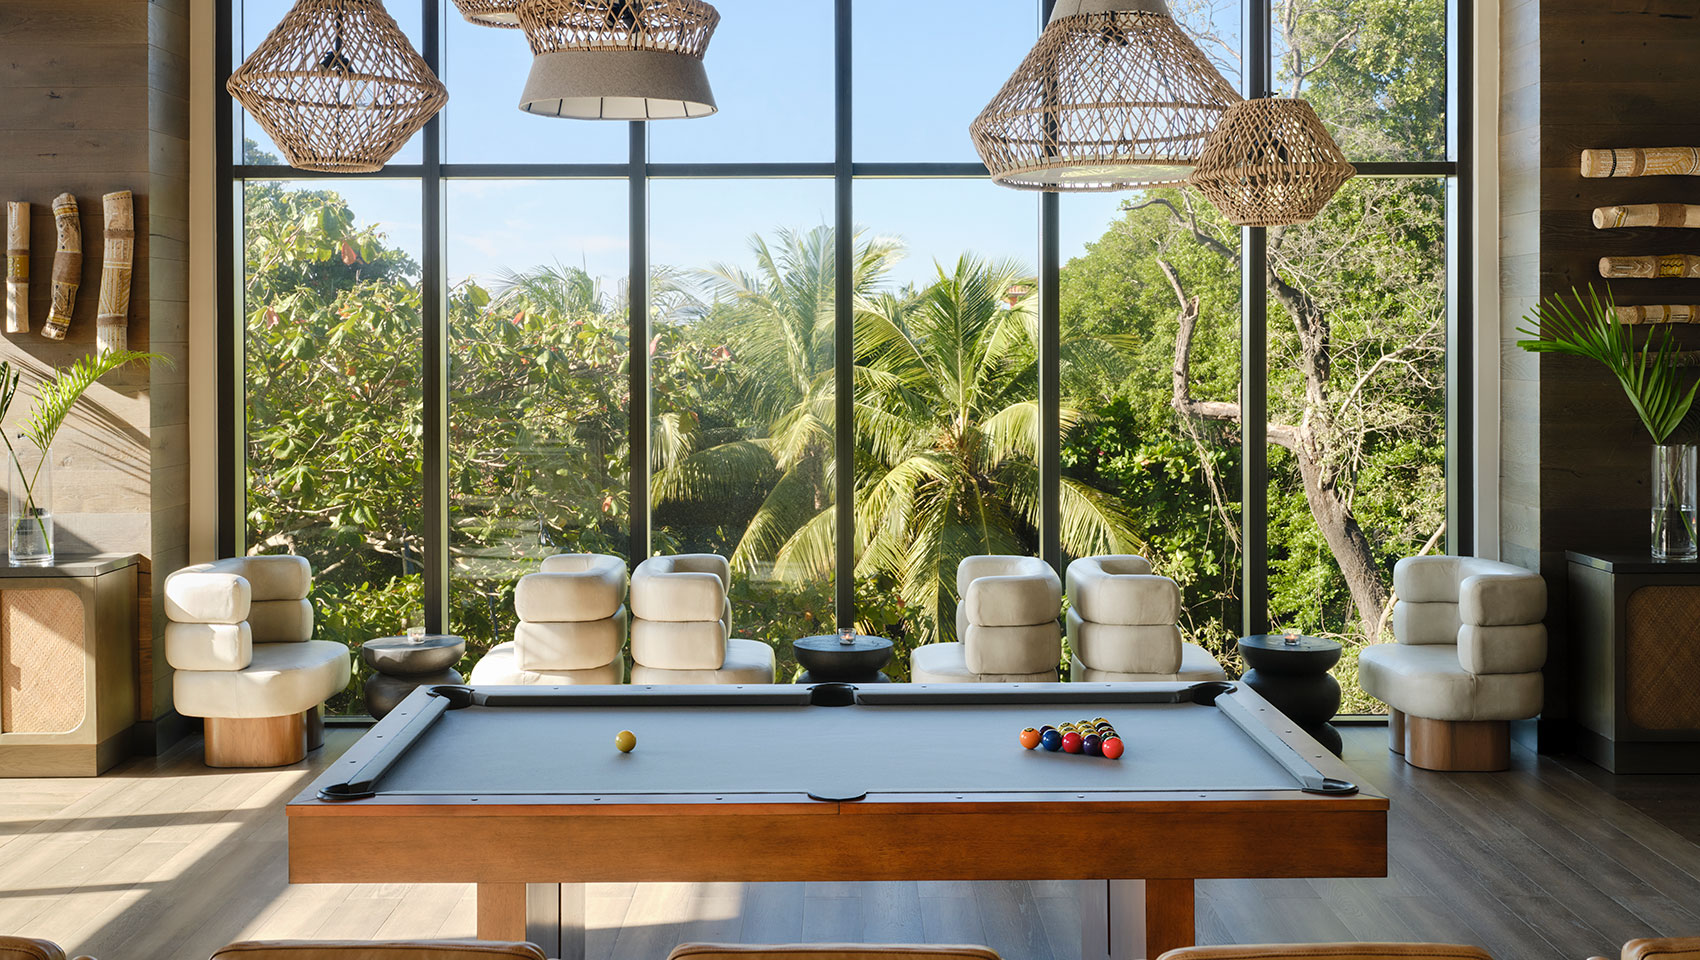 Vos Cafe & Bar Pool table in front of large window with jungle view